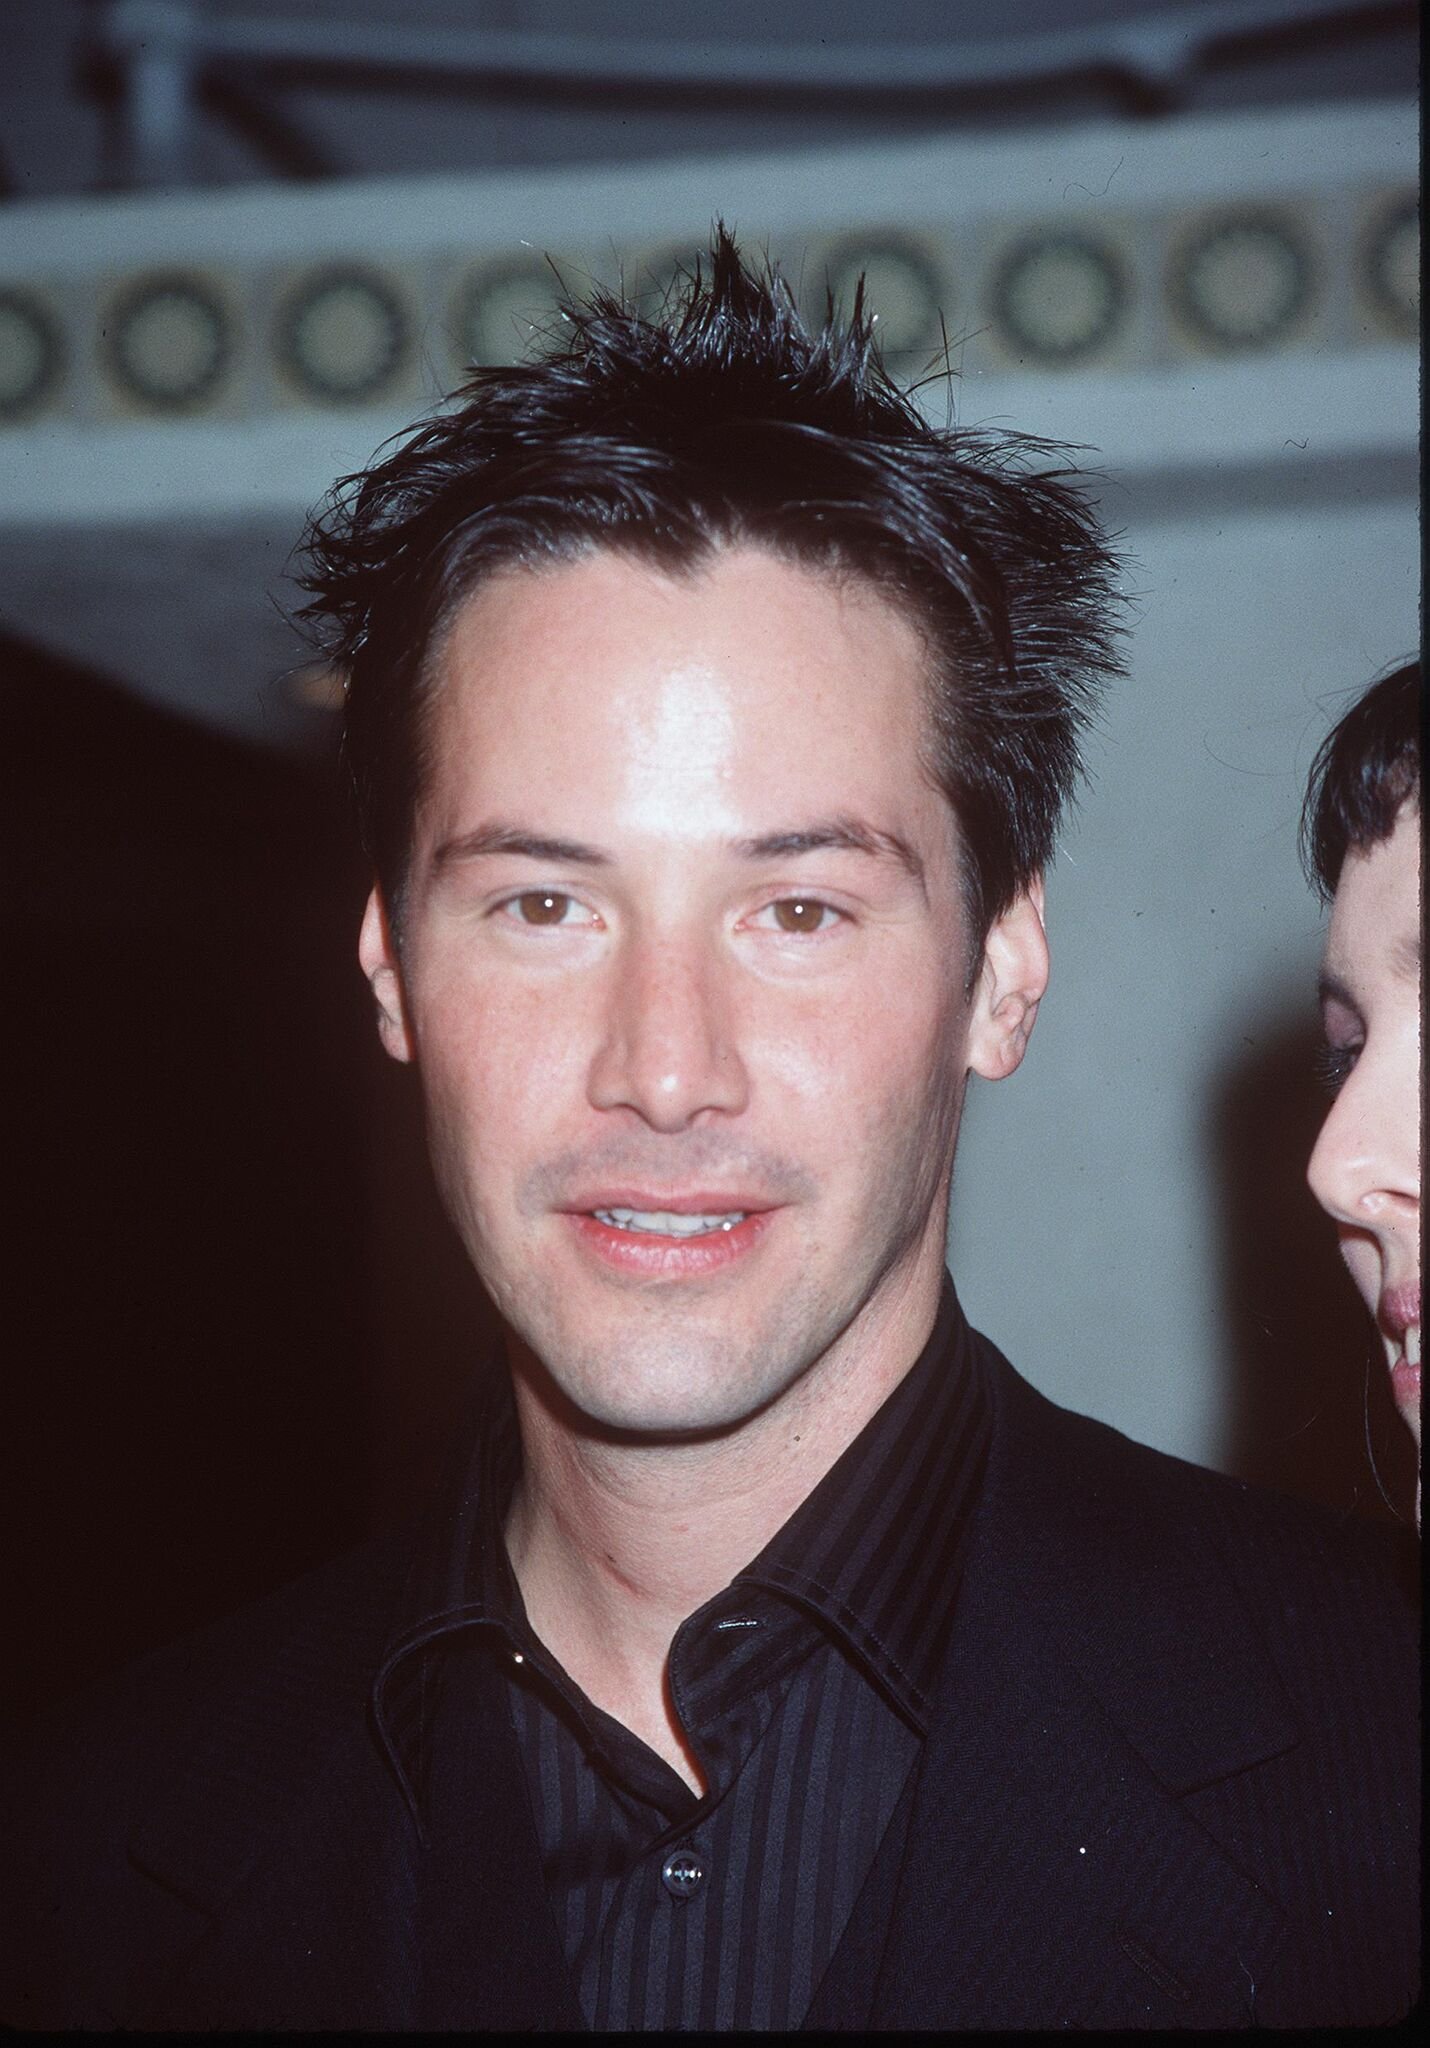 Keanu Reeves arrives at the world premiere showing of the new film "The Matrix"  | Getty Images